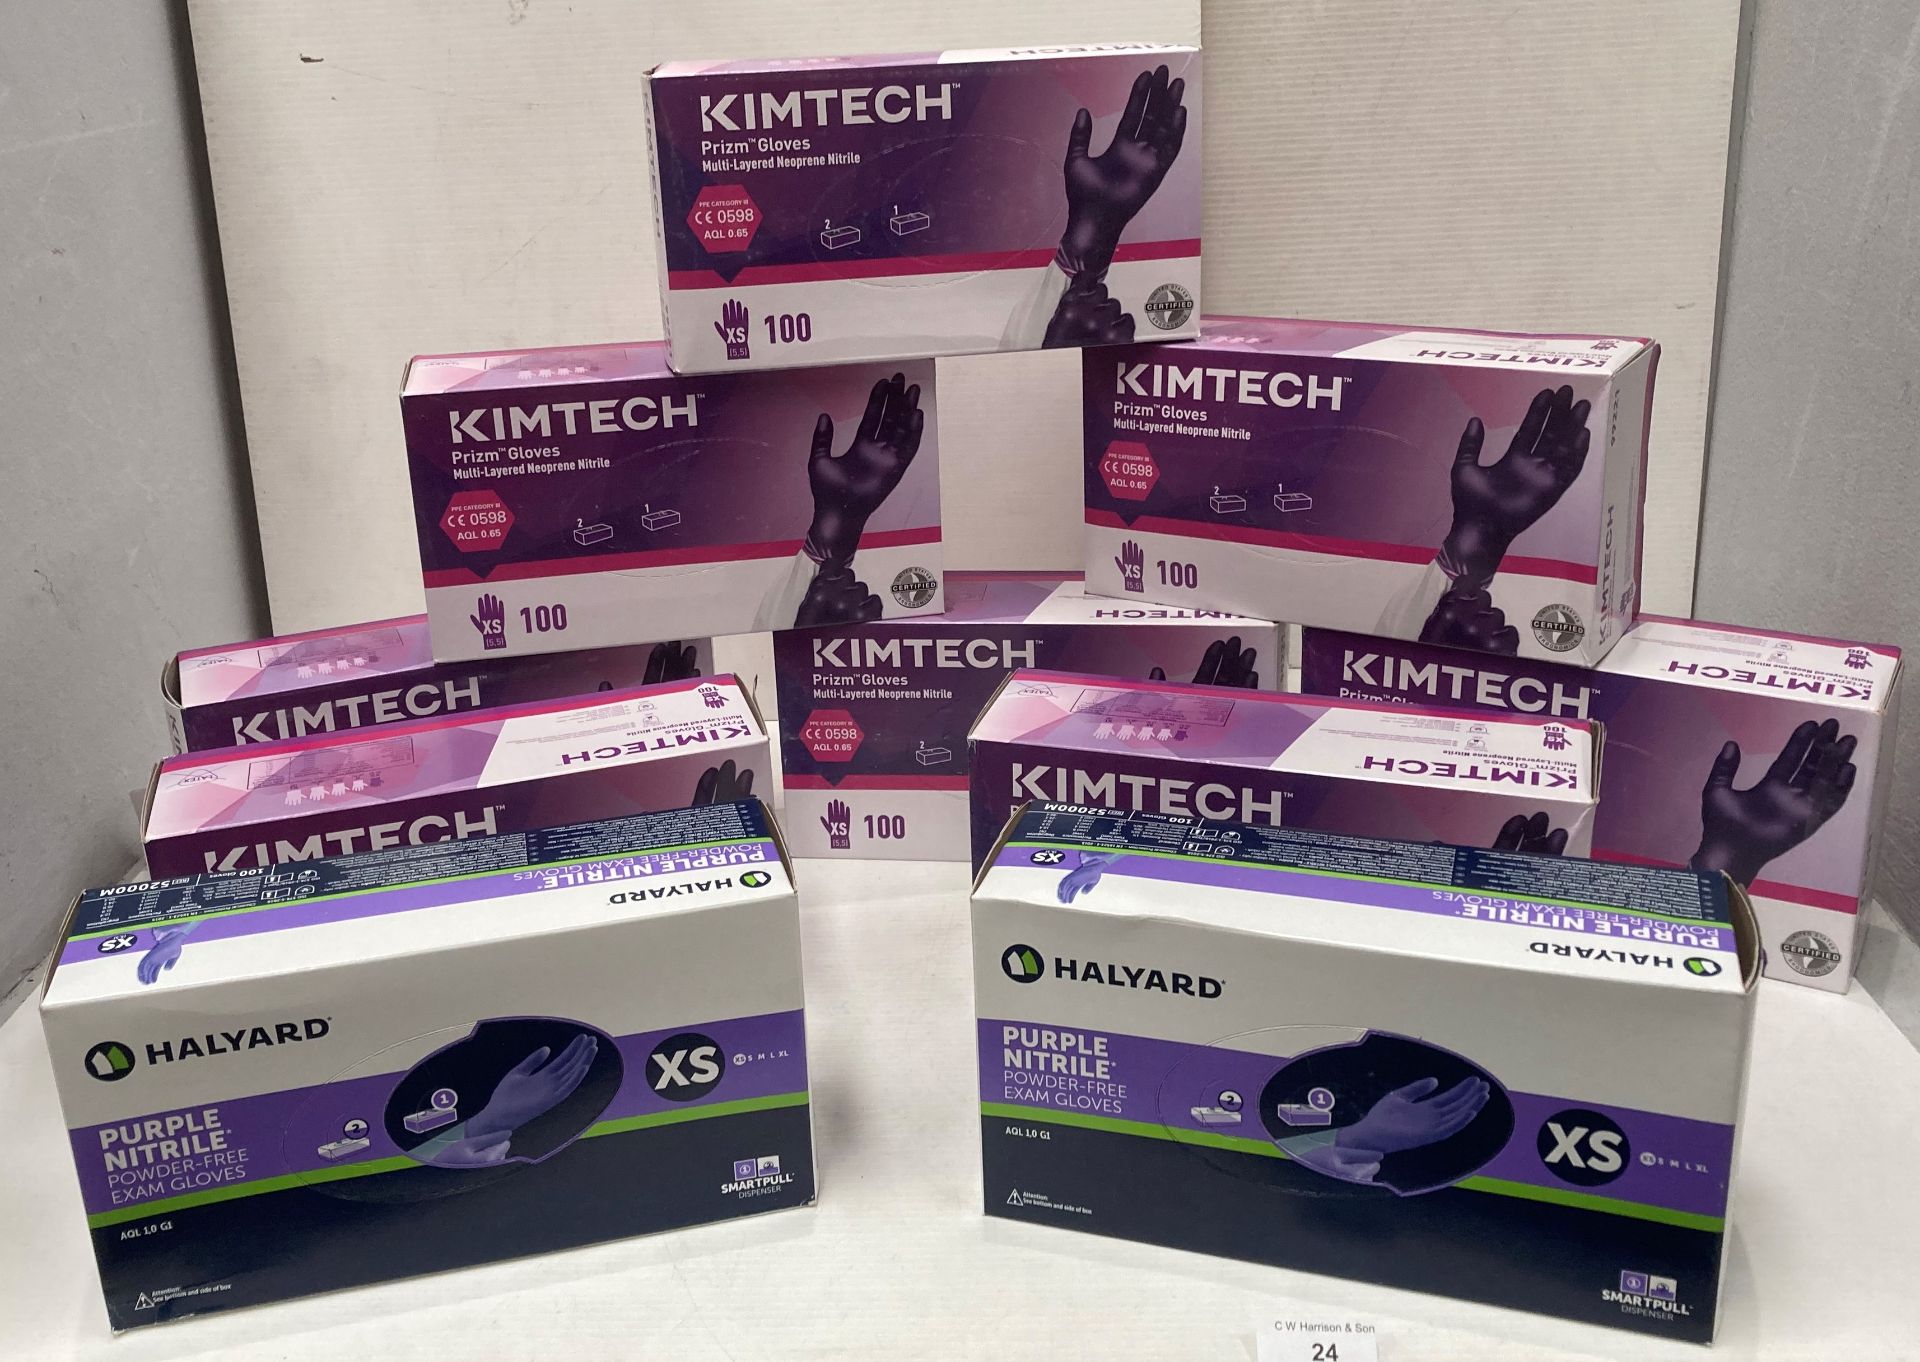 10 boxes of Kimtech purple Nitrate examination gloves - size XS (T01)